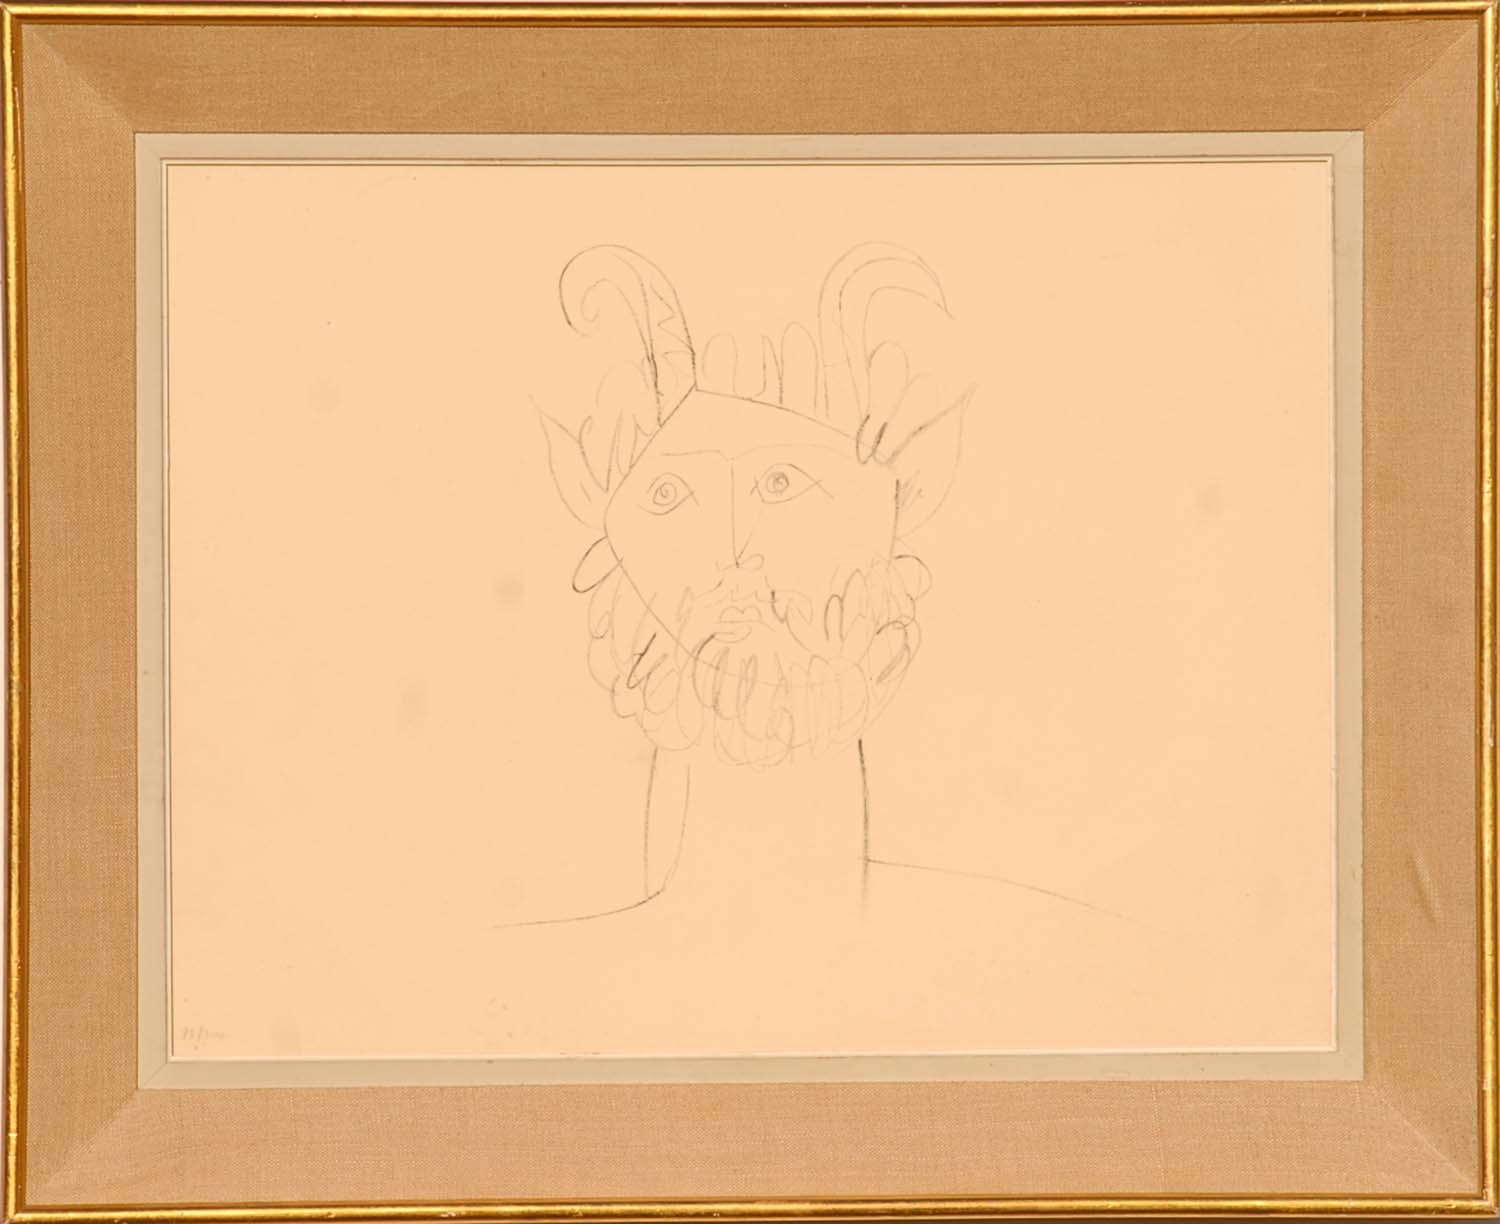 PABLO PICASSO 'Satyr-Antibes suite', lithograph, 1958, handnumbered in pencil, edition size 300,